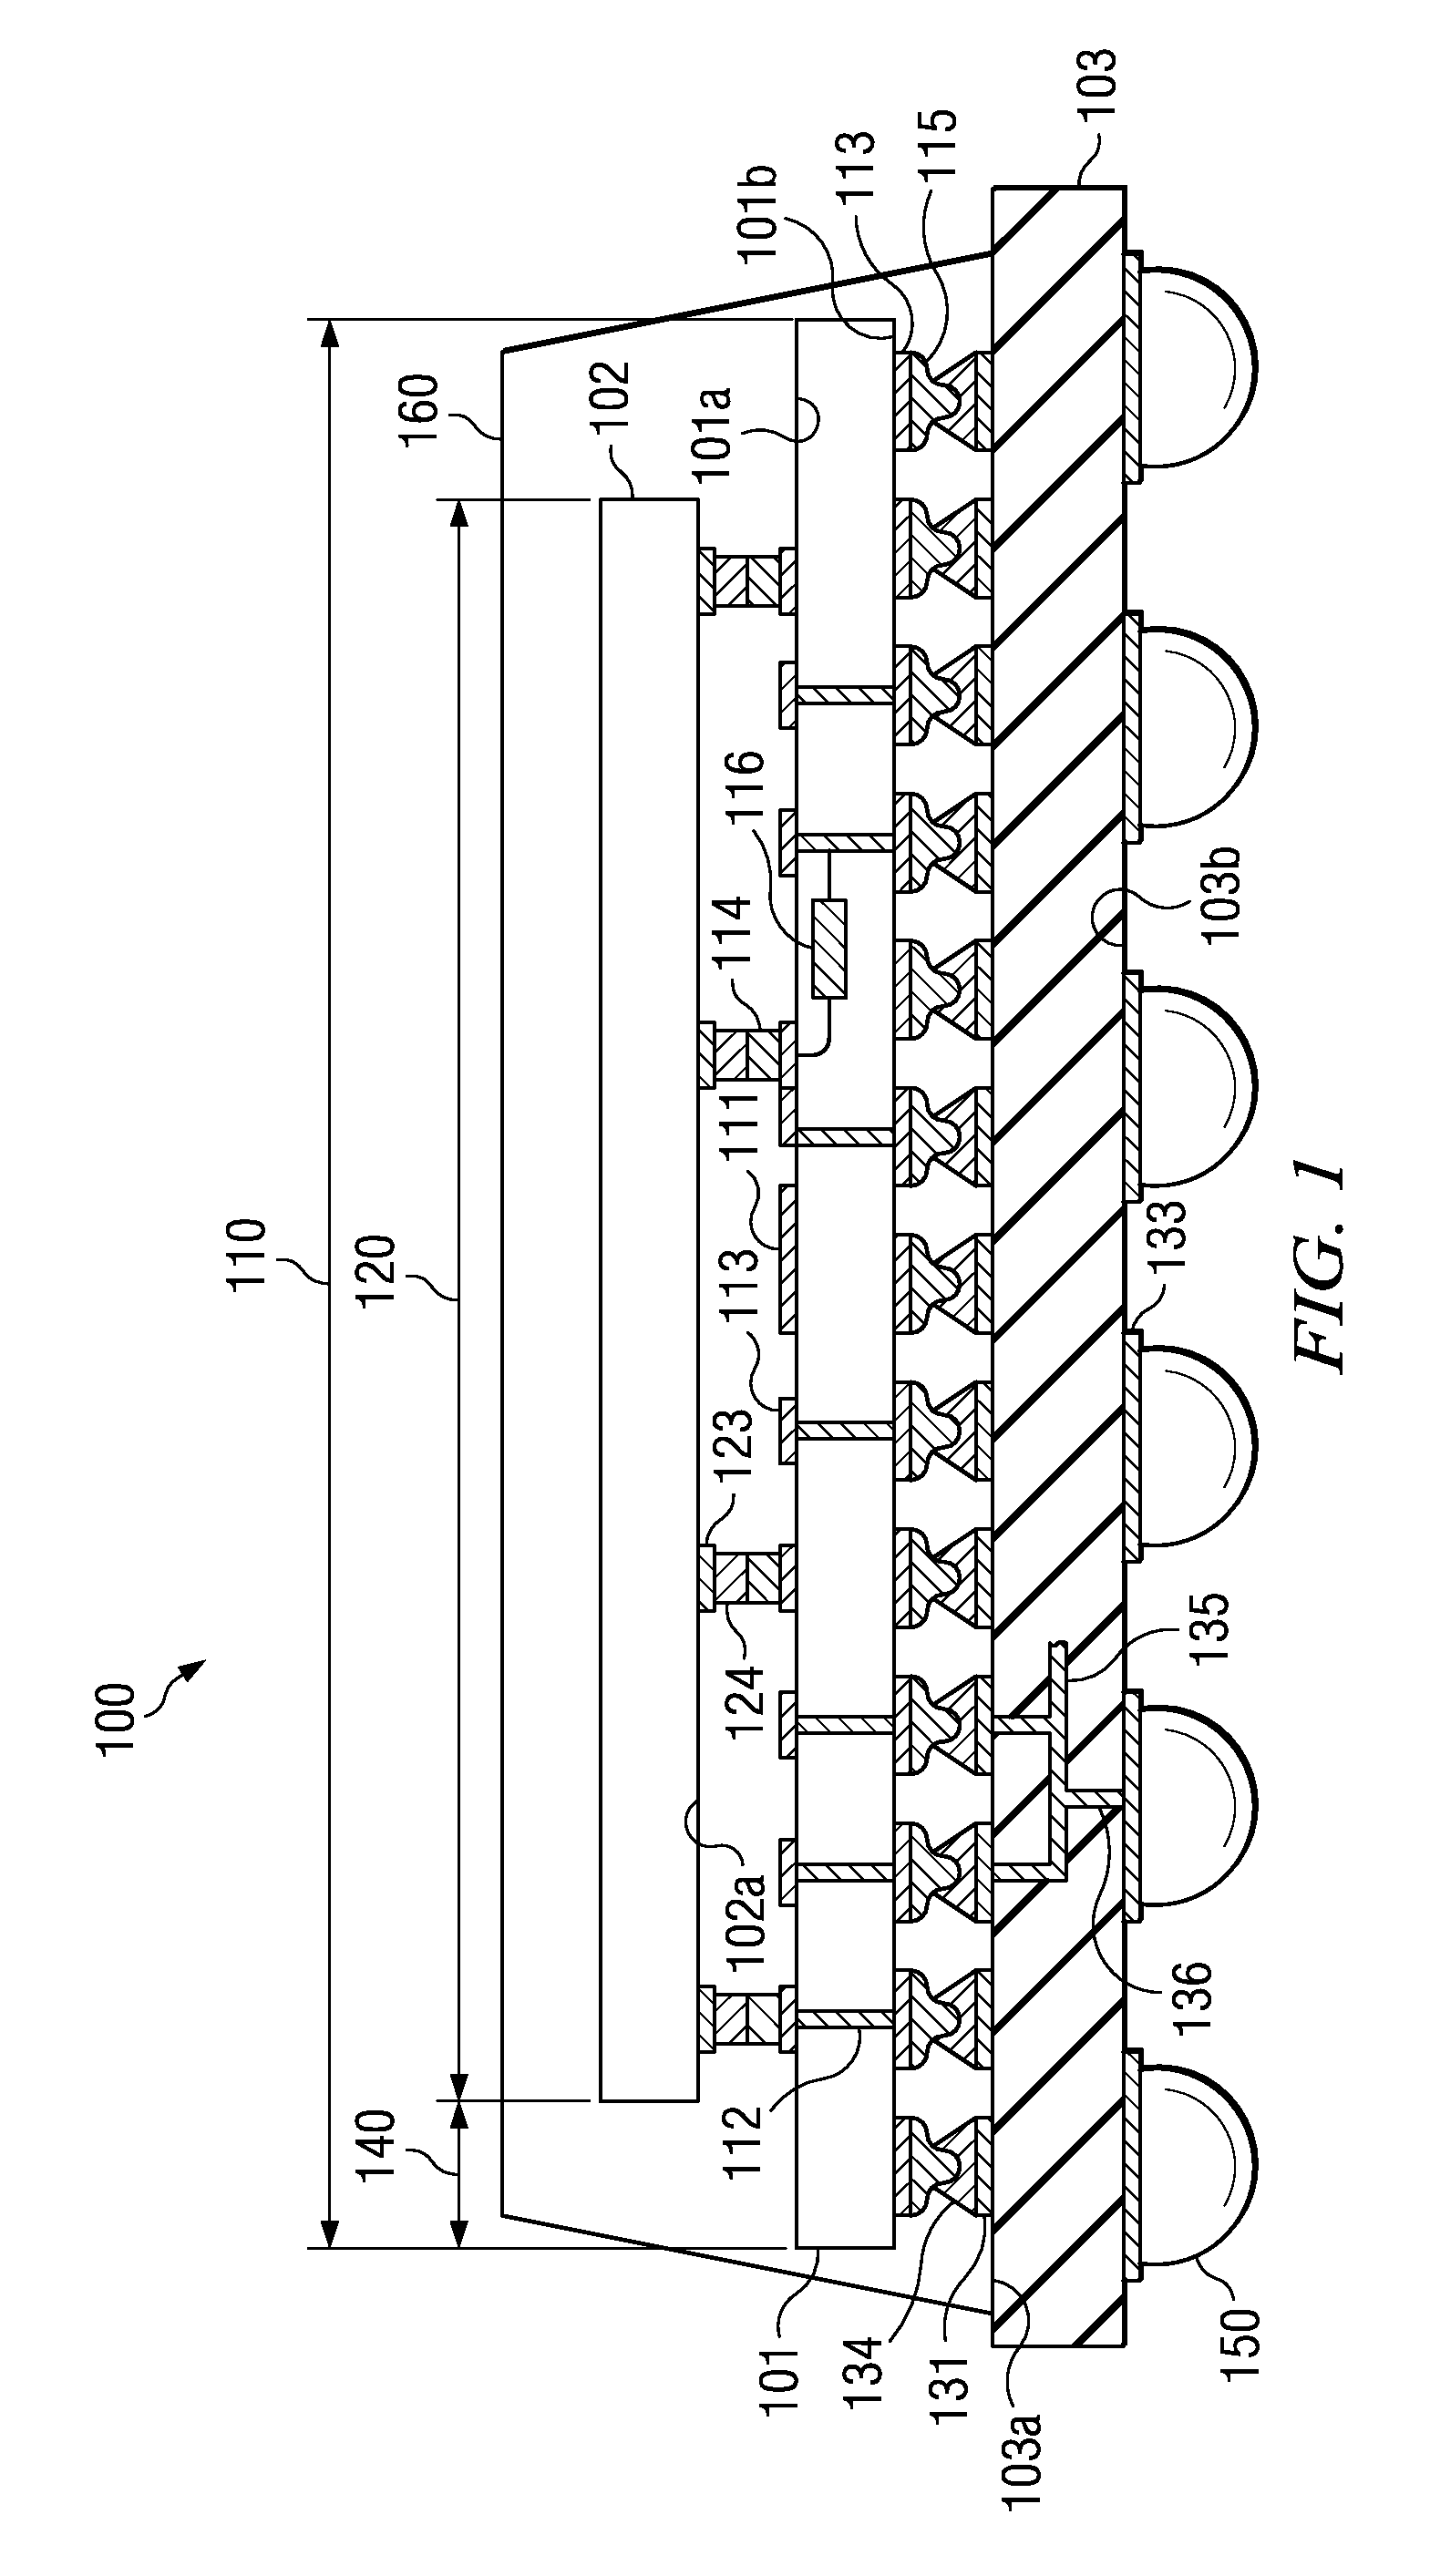 Packaged system of semiconductor chips having a semiconductor interposer